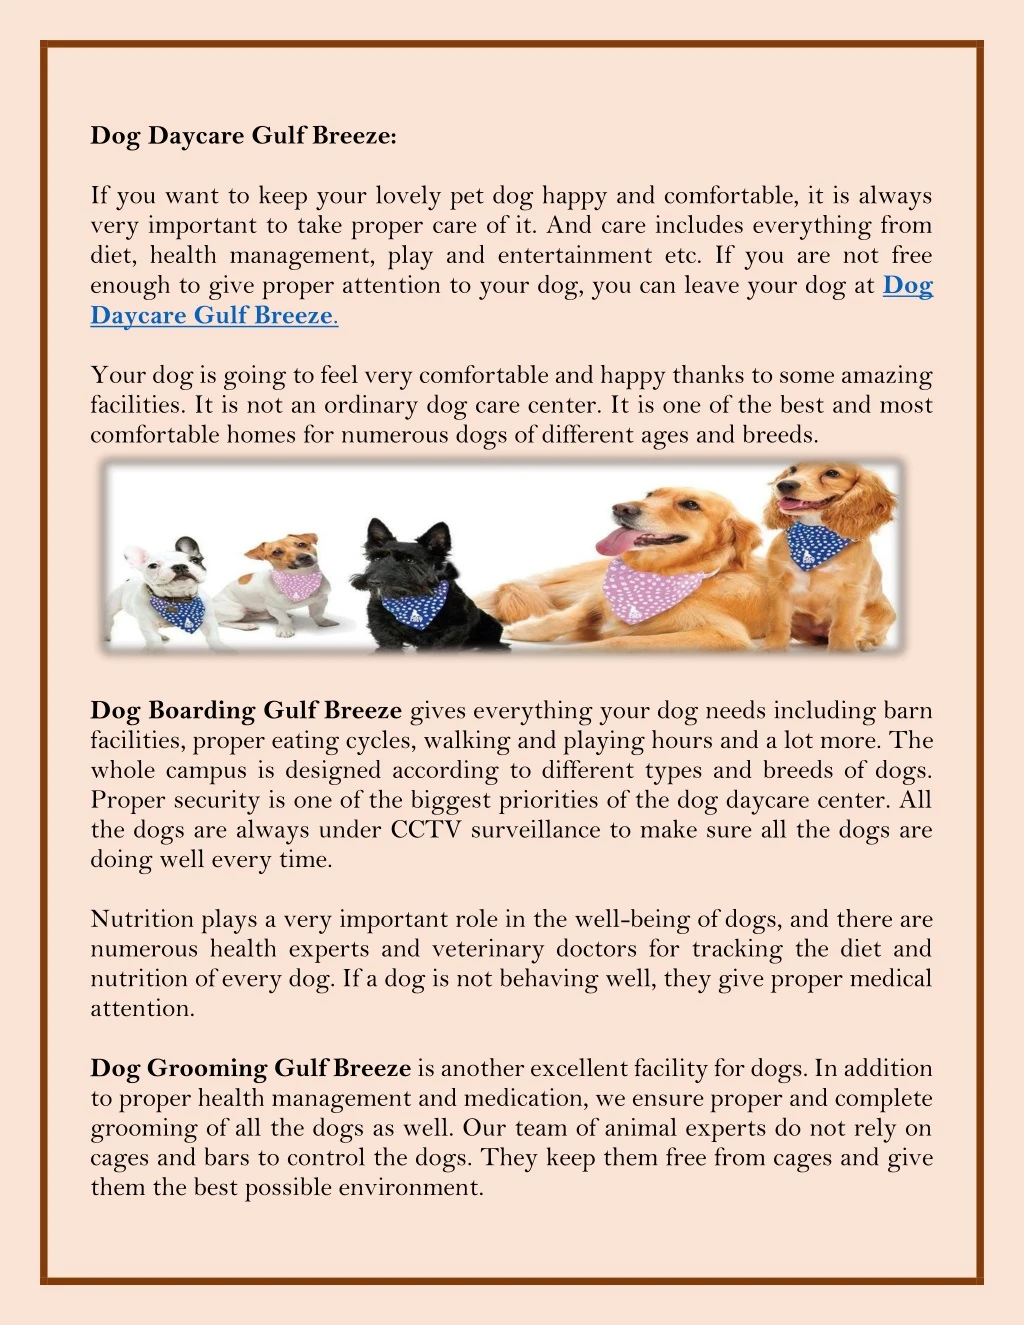 dog daycare gulf breeze if you want to keep your